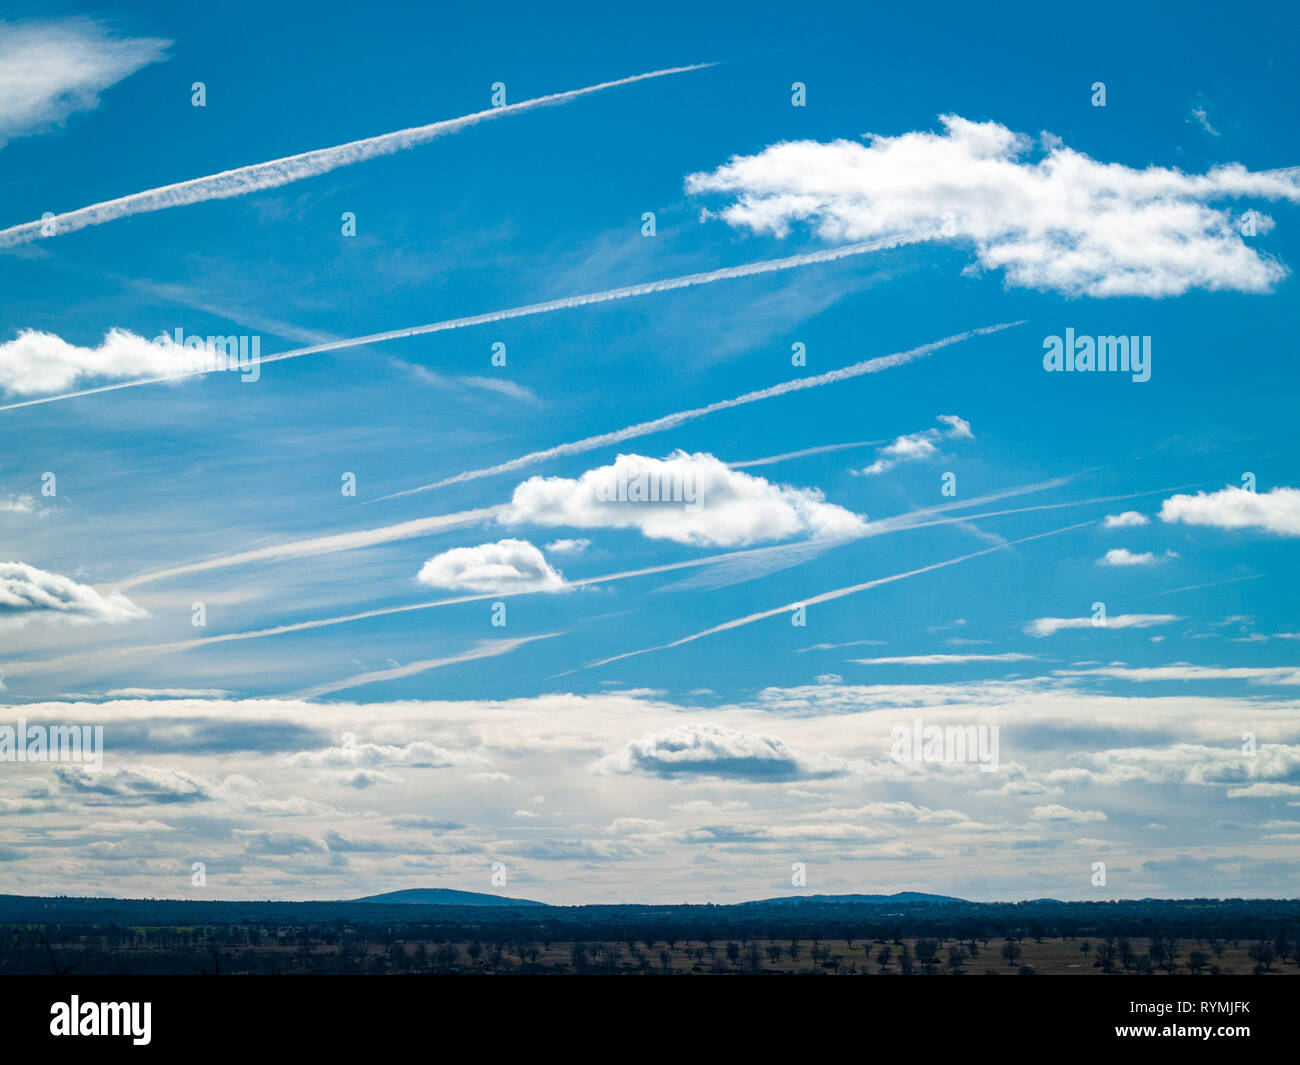 Chemtrails or vapor condensation trails of aircraft in the sky Stock Photo